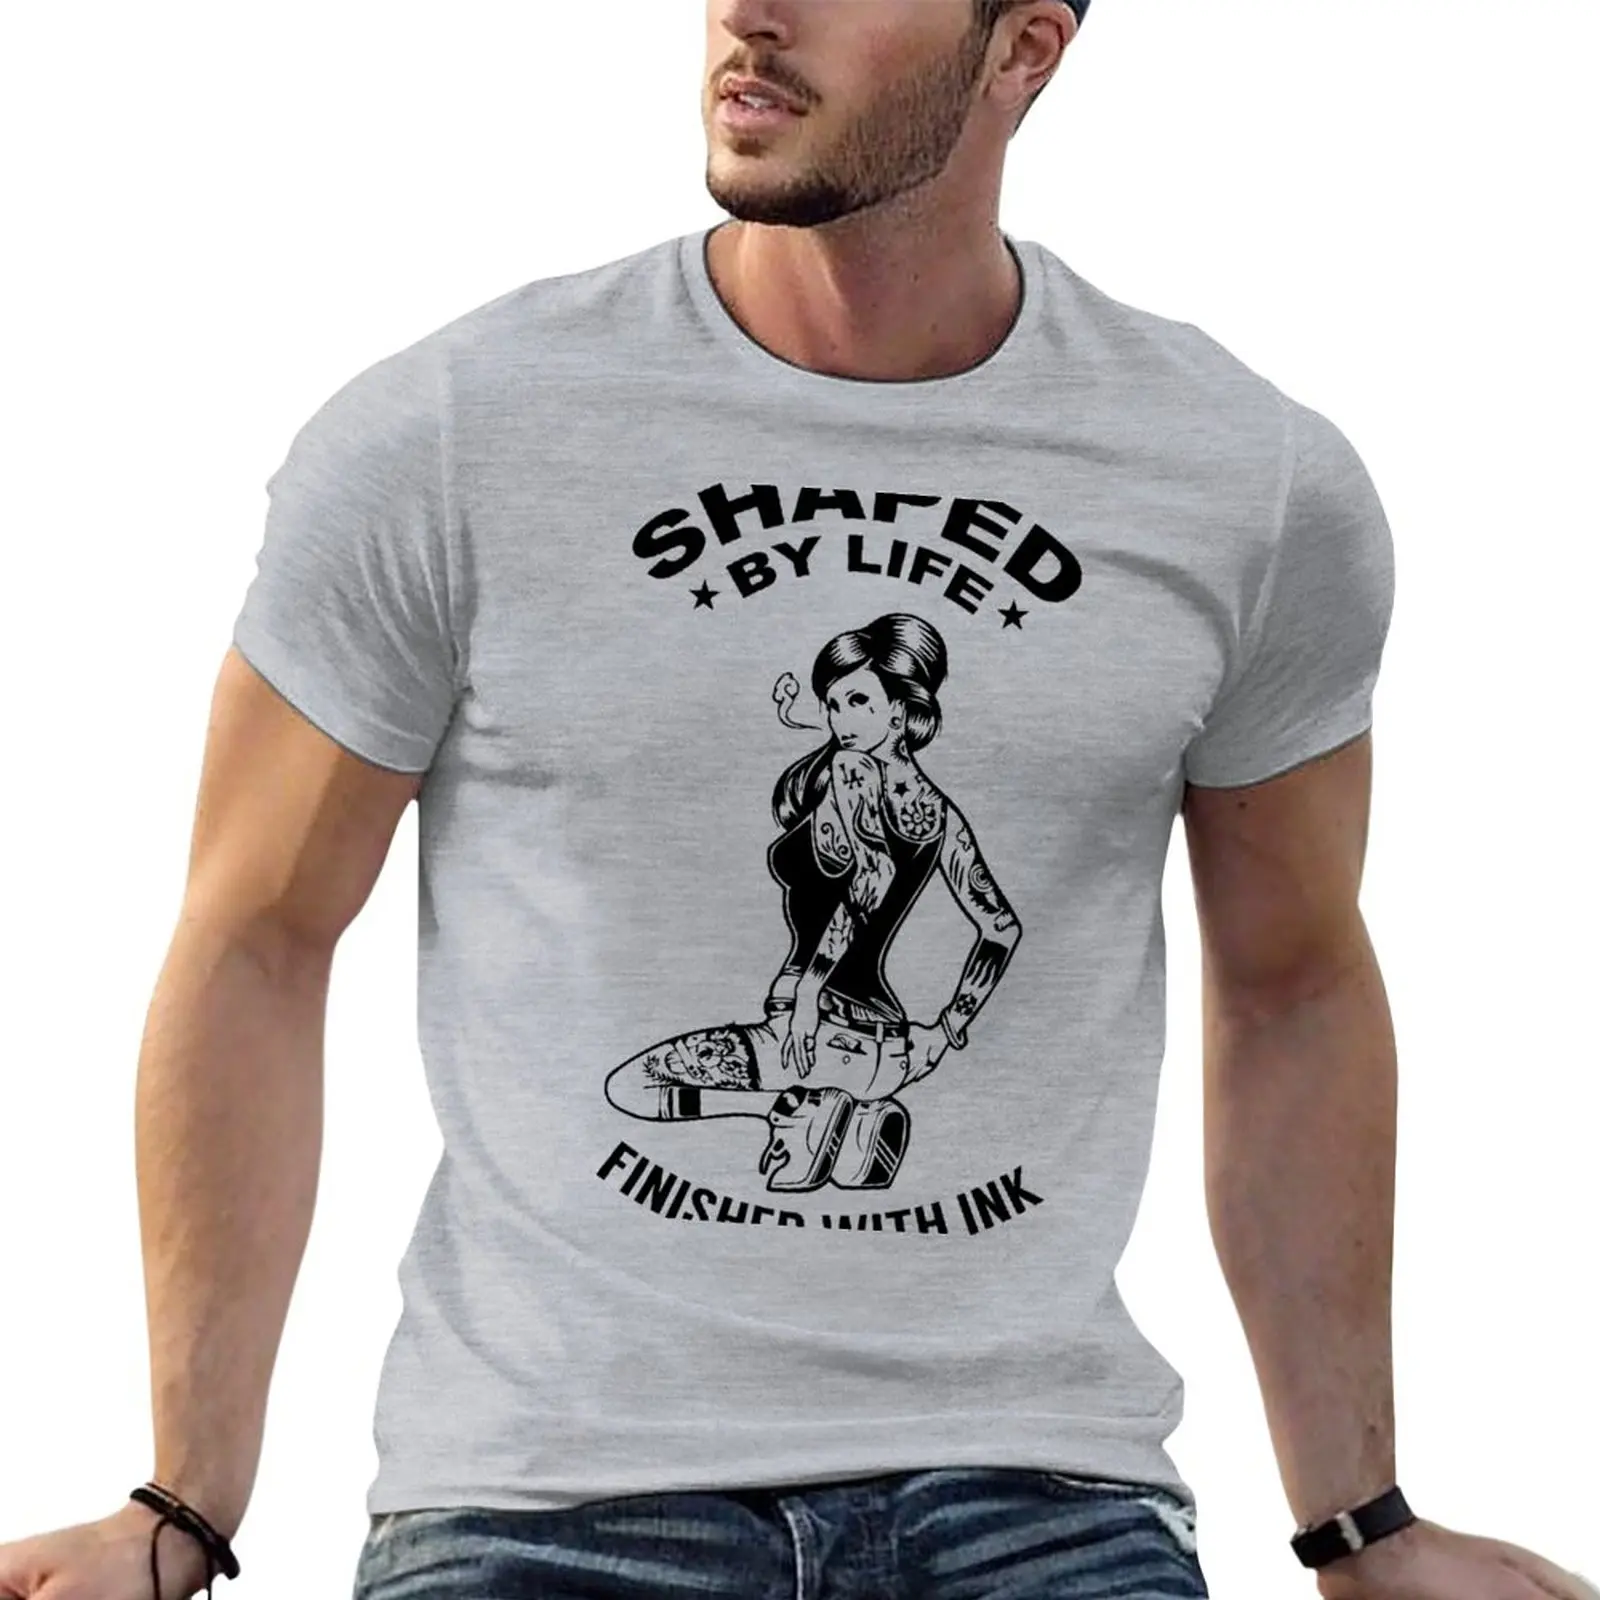 

Shaped By Life - Finished With Ink Shirt Tattoo T-Shirt boys whites cute clothes sweat shirts Men's cotton t-shirt